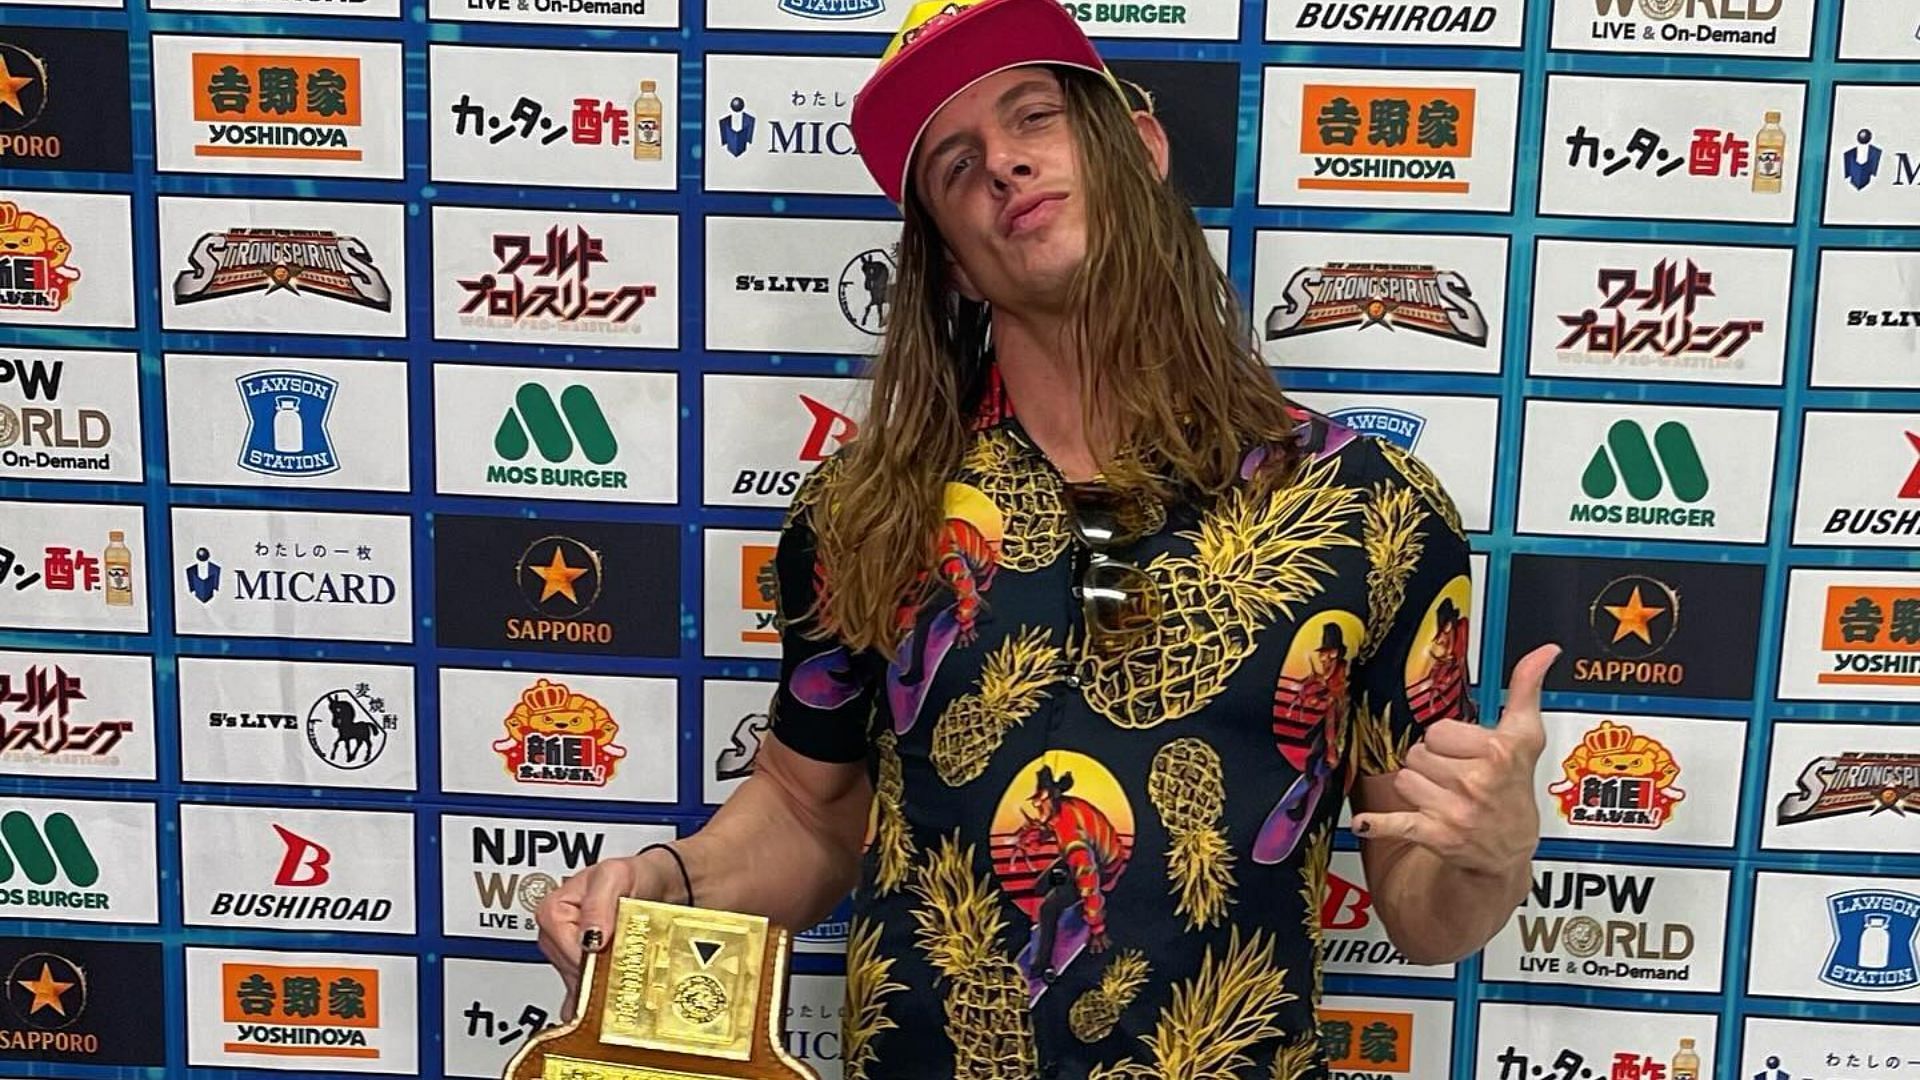 Matt Riddle has found some success outside WWE